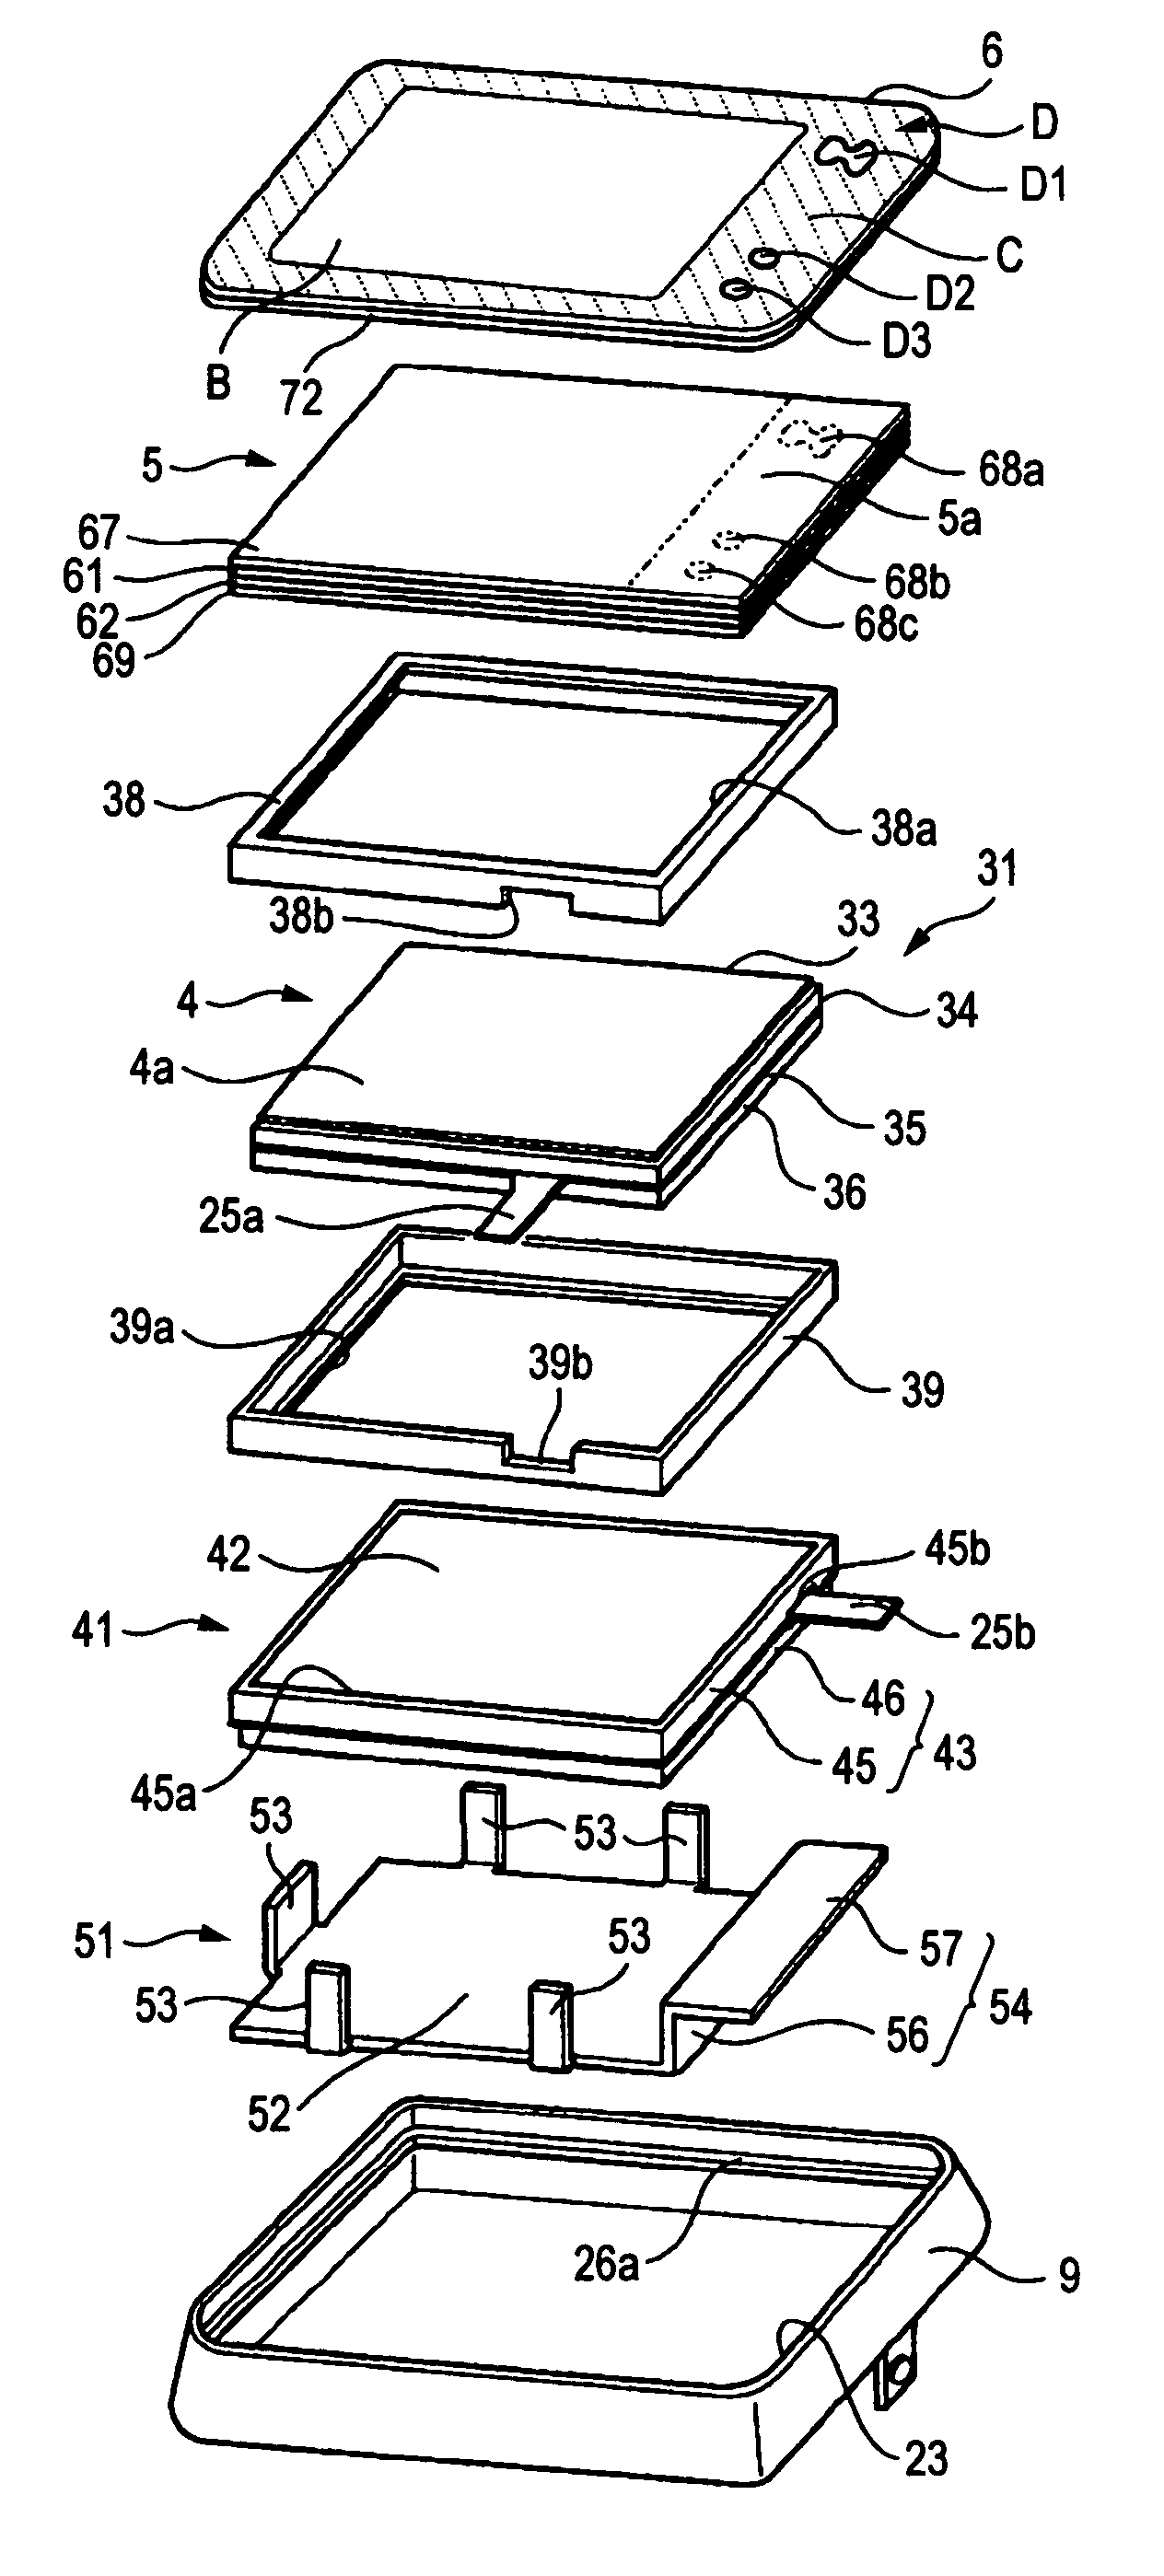 Display device equipped with a touch panel